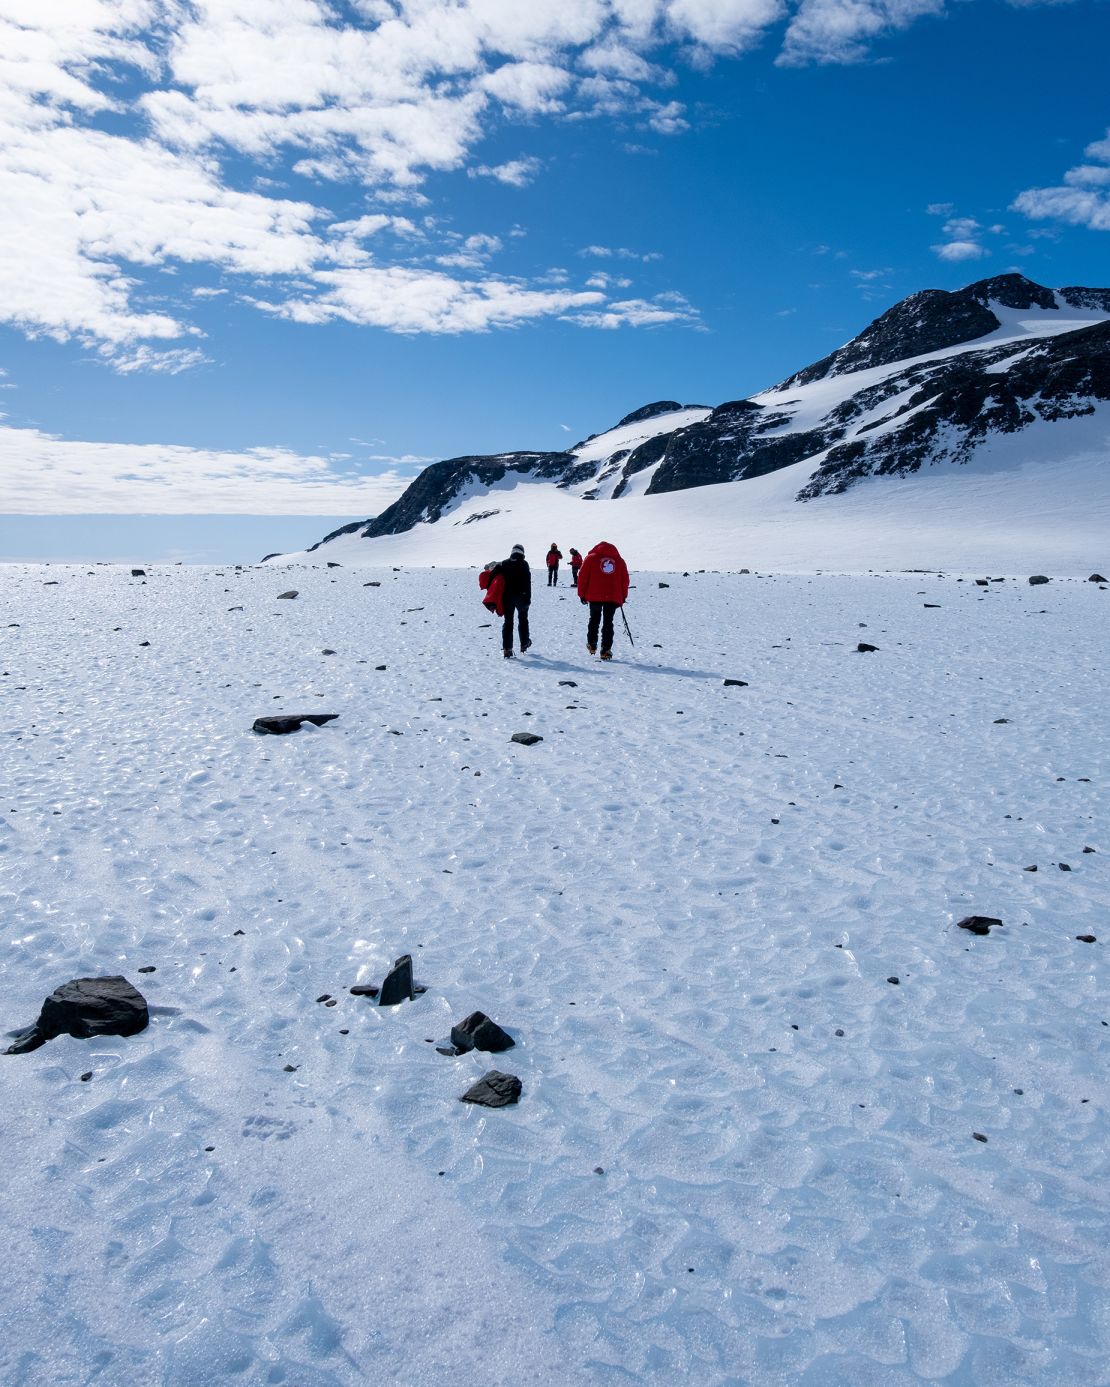 Meteorites are disappearing into the Antarctic ice, a new study says, as a result of the climate crisis. Ice sampling occurs on a blue ice area during the 2022 Chilean Antarctic Institute field mission.